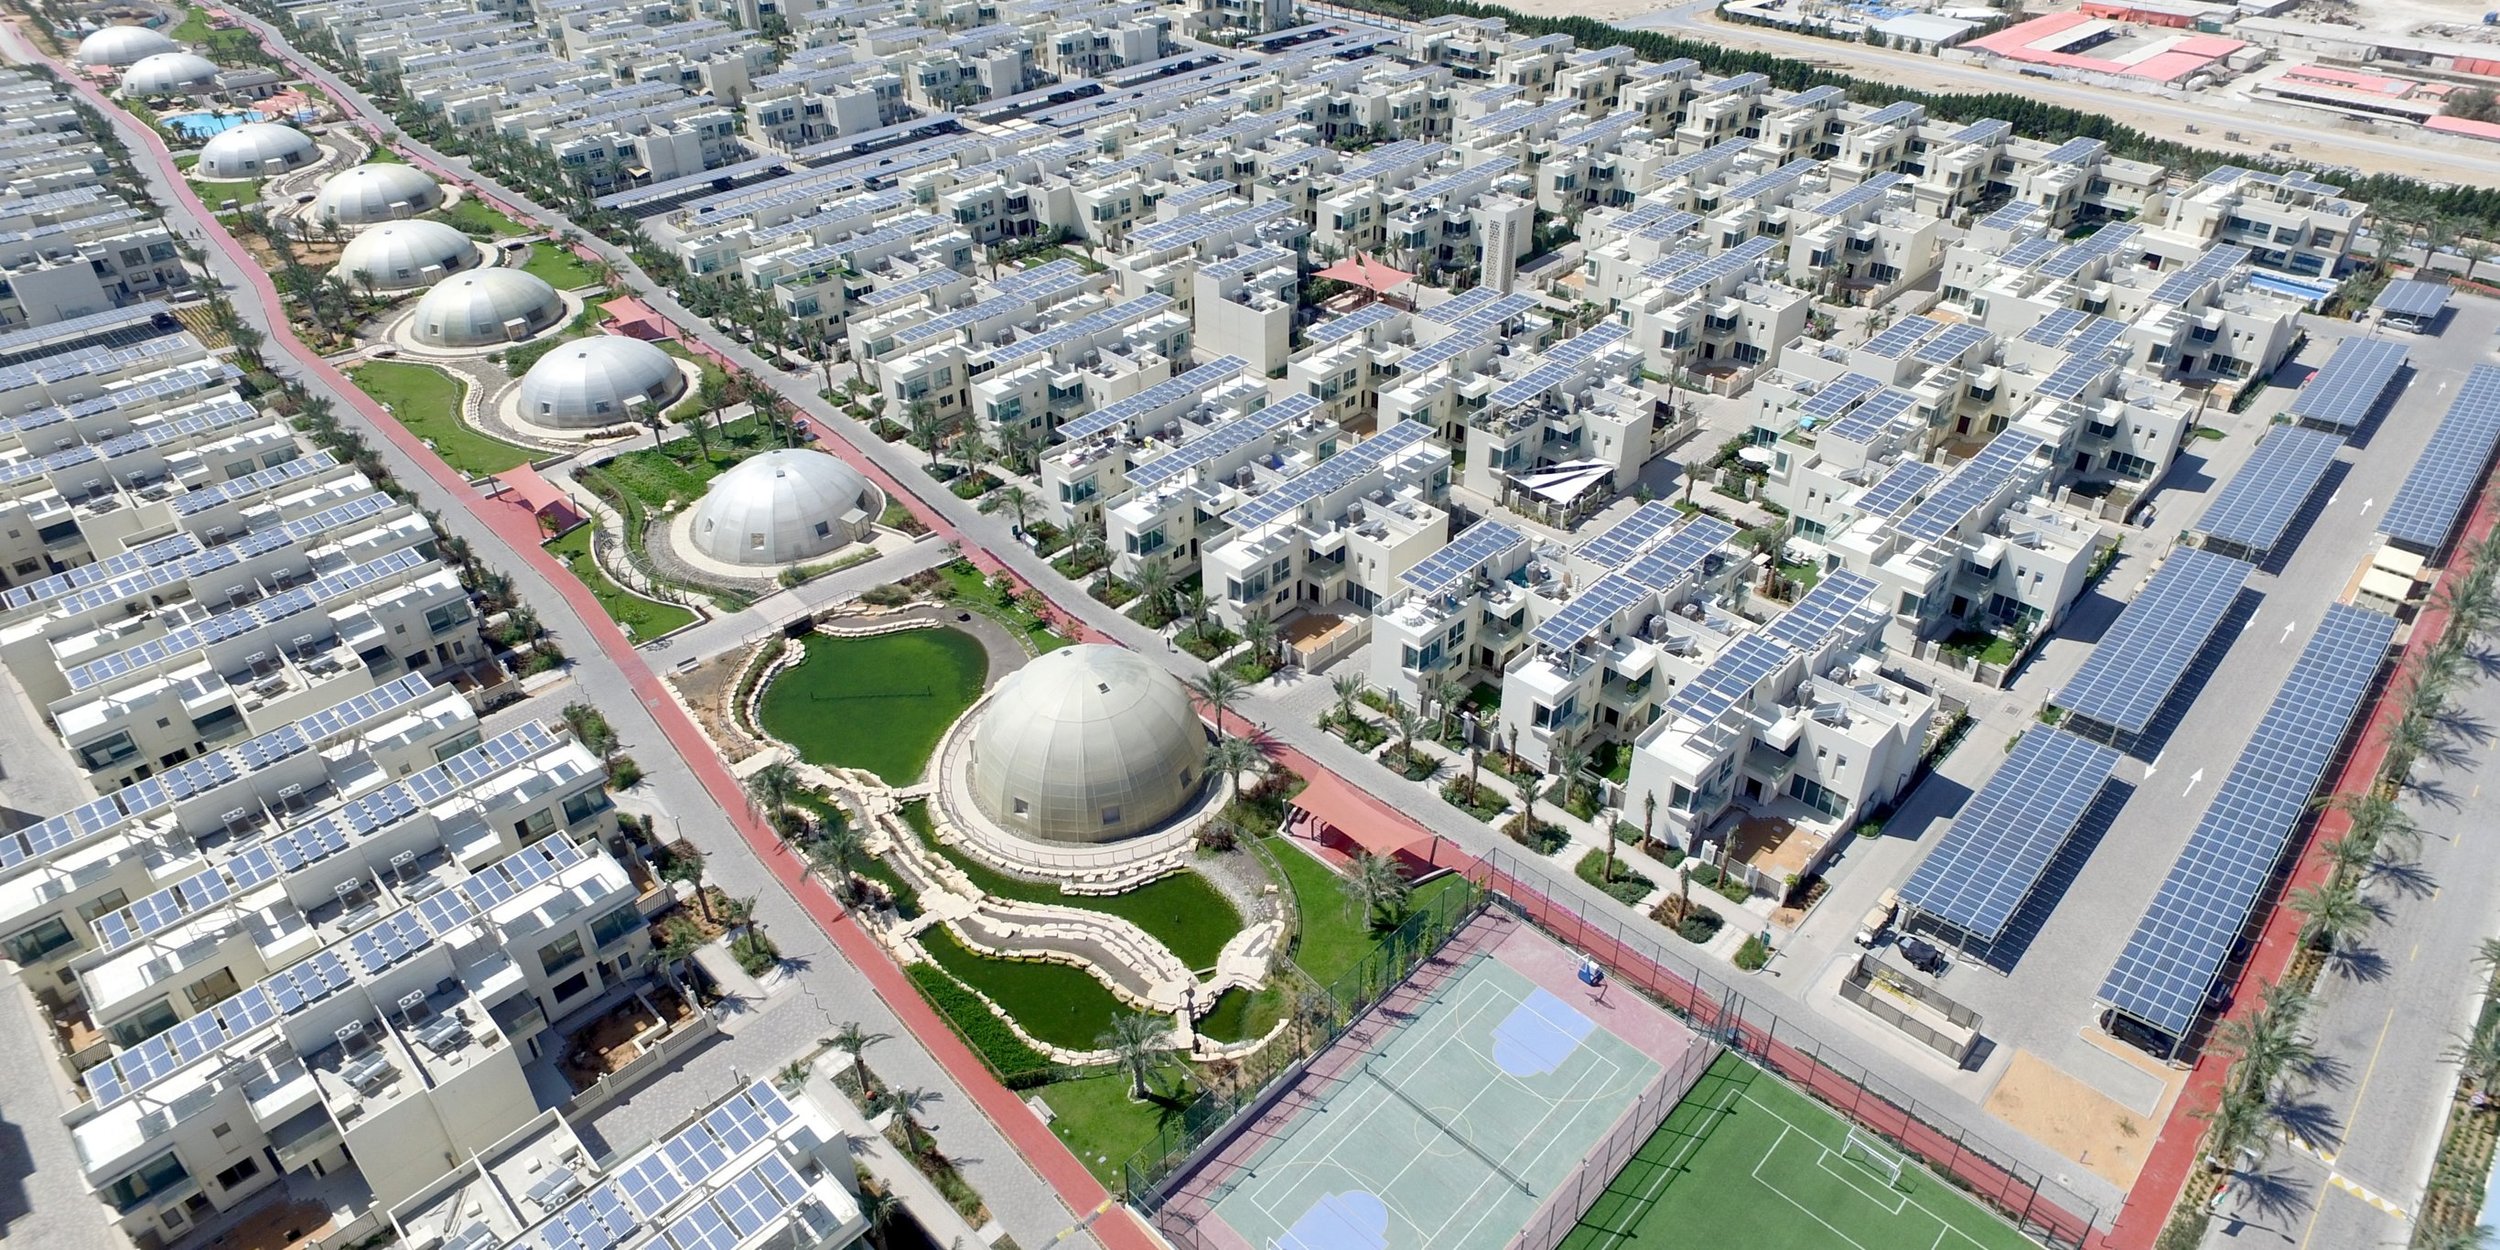 The Sustainable City, a new neighborhood outside of Dubai that embraces the principles of sustainable development and healthy living.